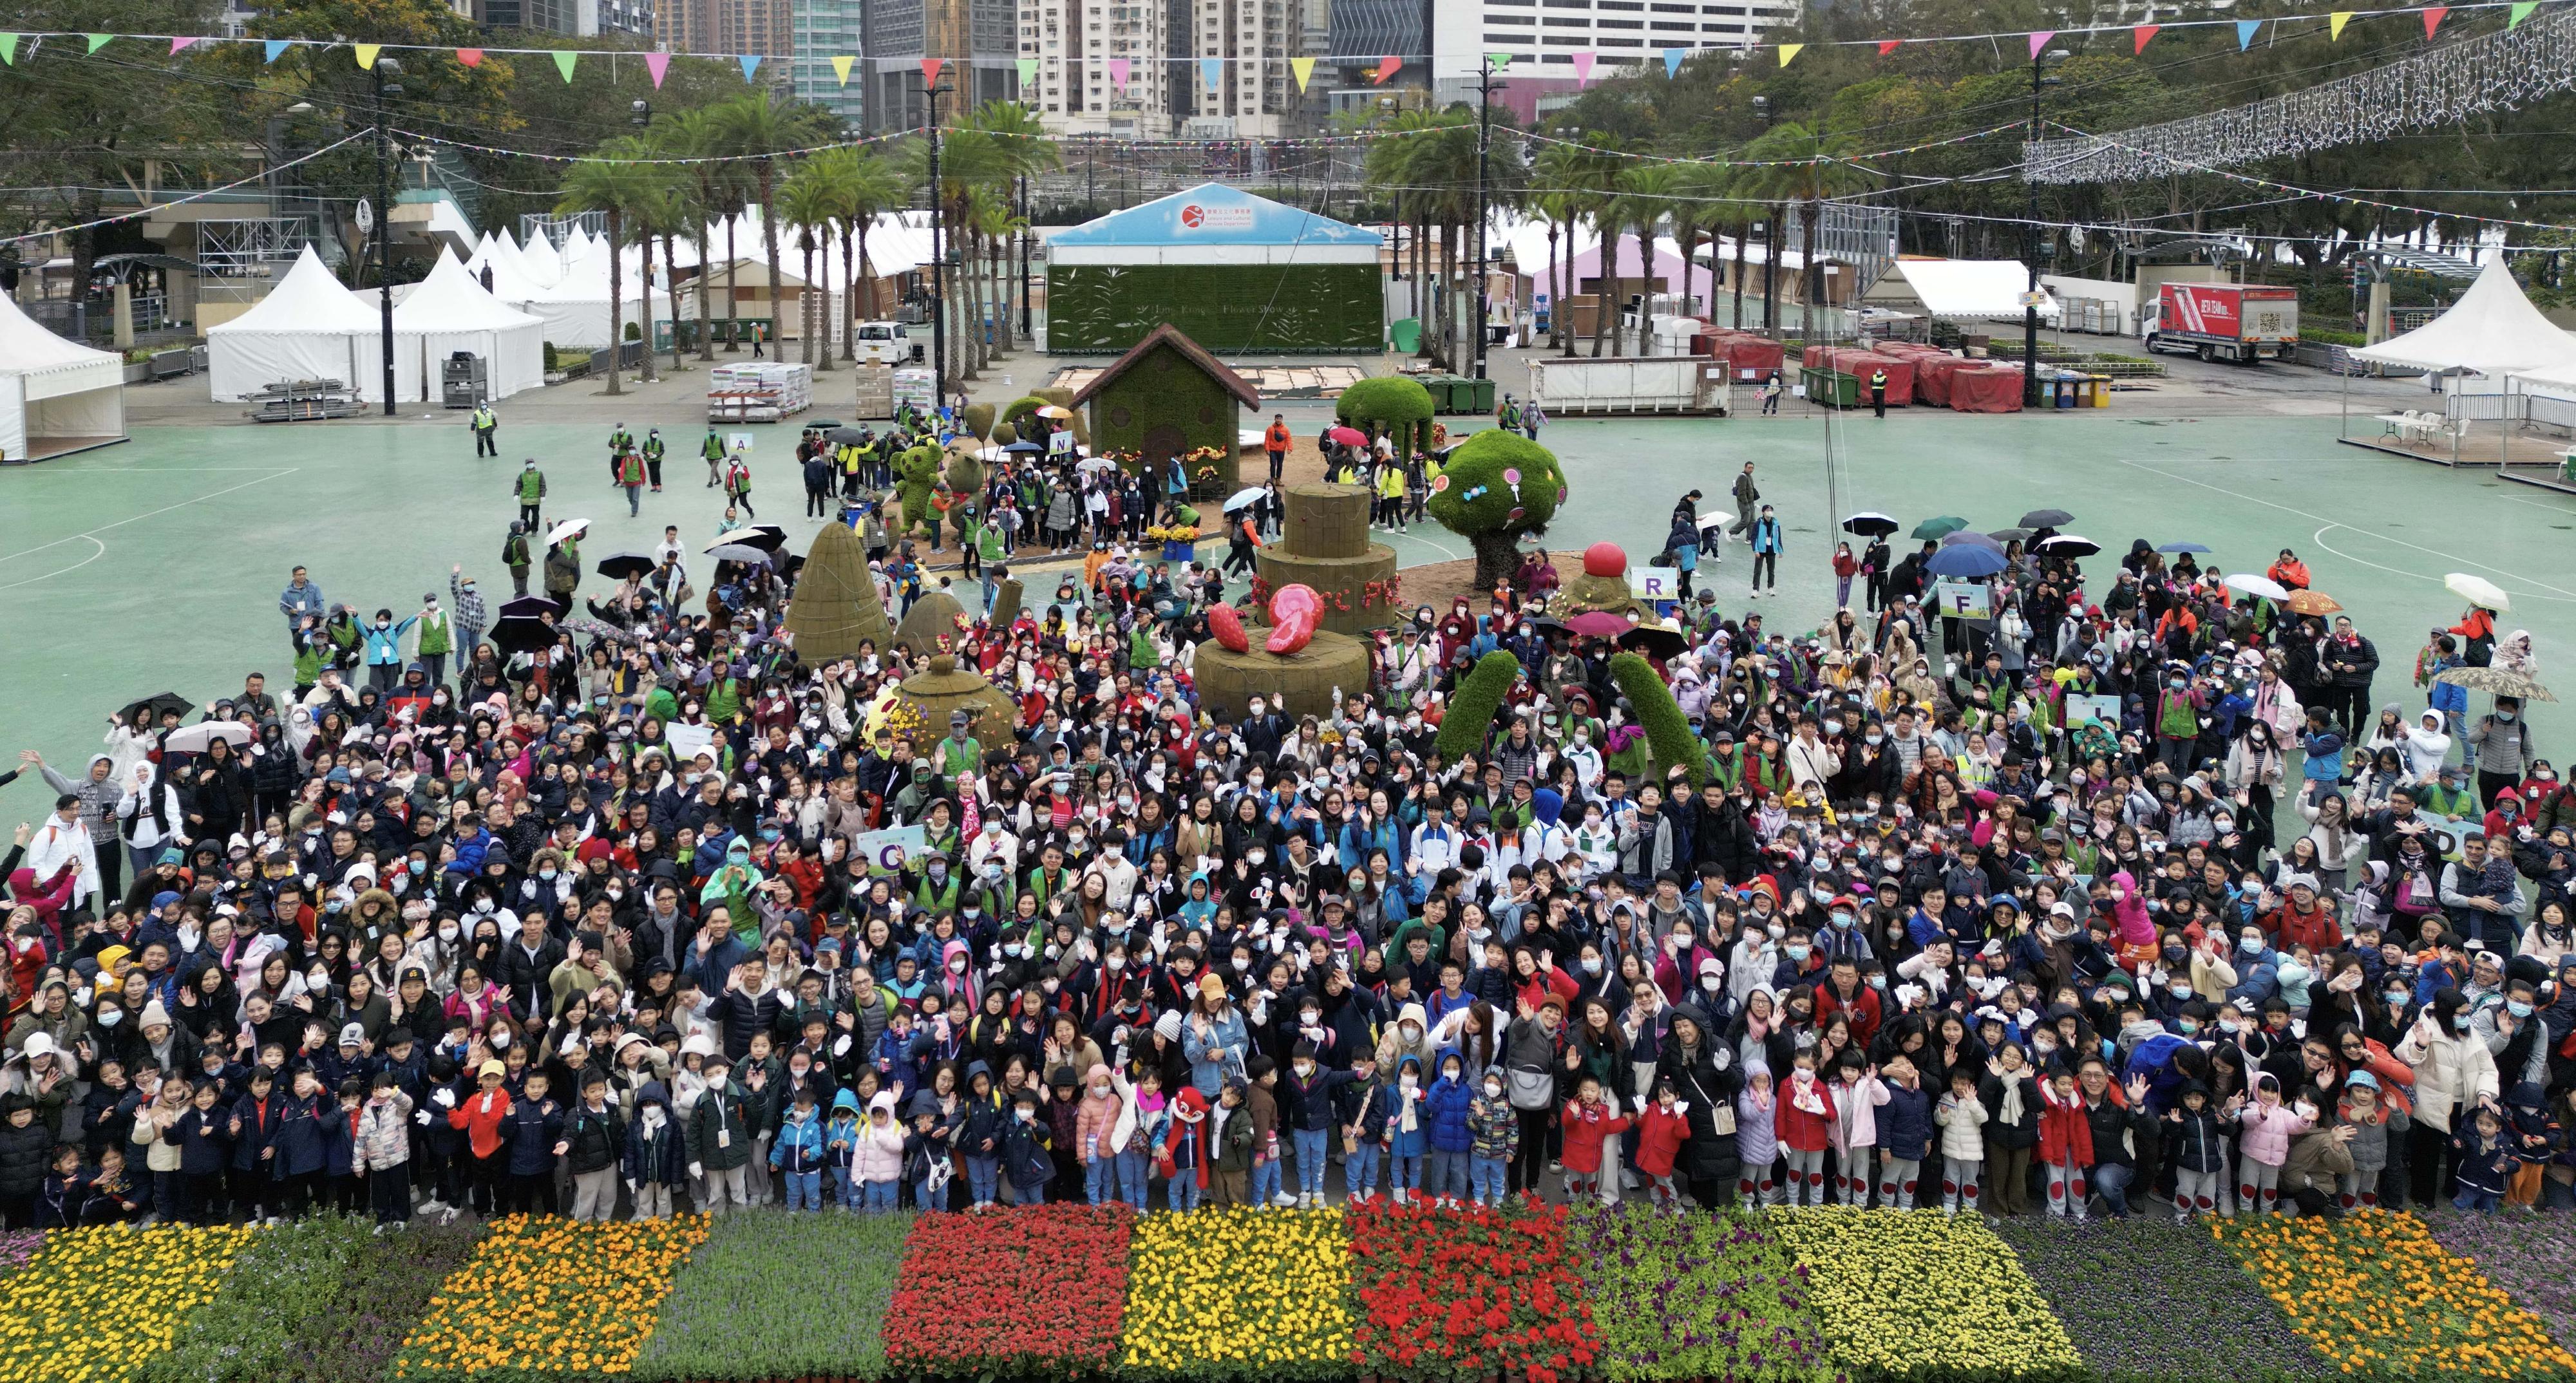 More than 1 100 students from 38 schools helped put on a spectacular horticultural display, "The Candy House", at Victoria Park today (March 2). The parterre is embellished with about 44 000 colourful flowers and plants of various species.